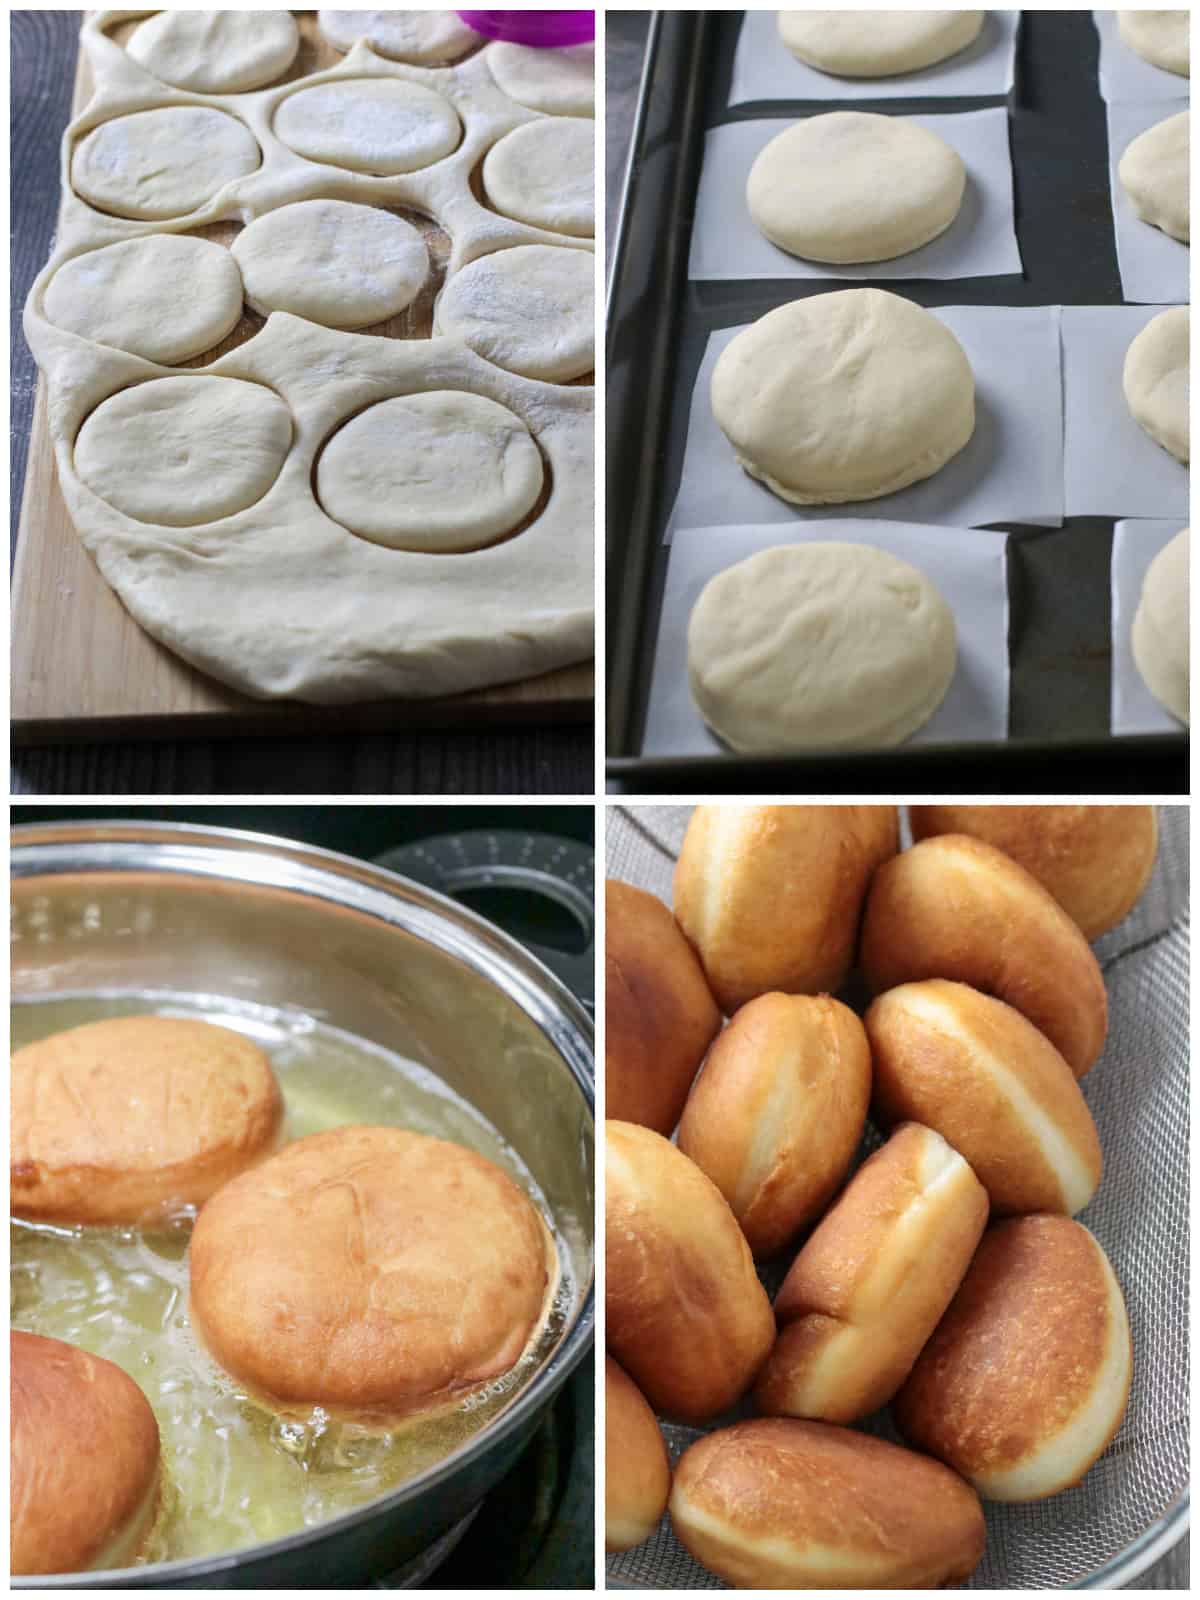 Cutting the donuts shape from the dough, letting them rise, frying and draining them.